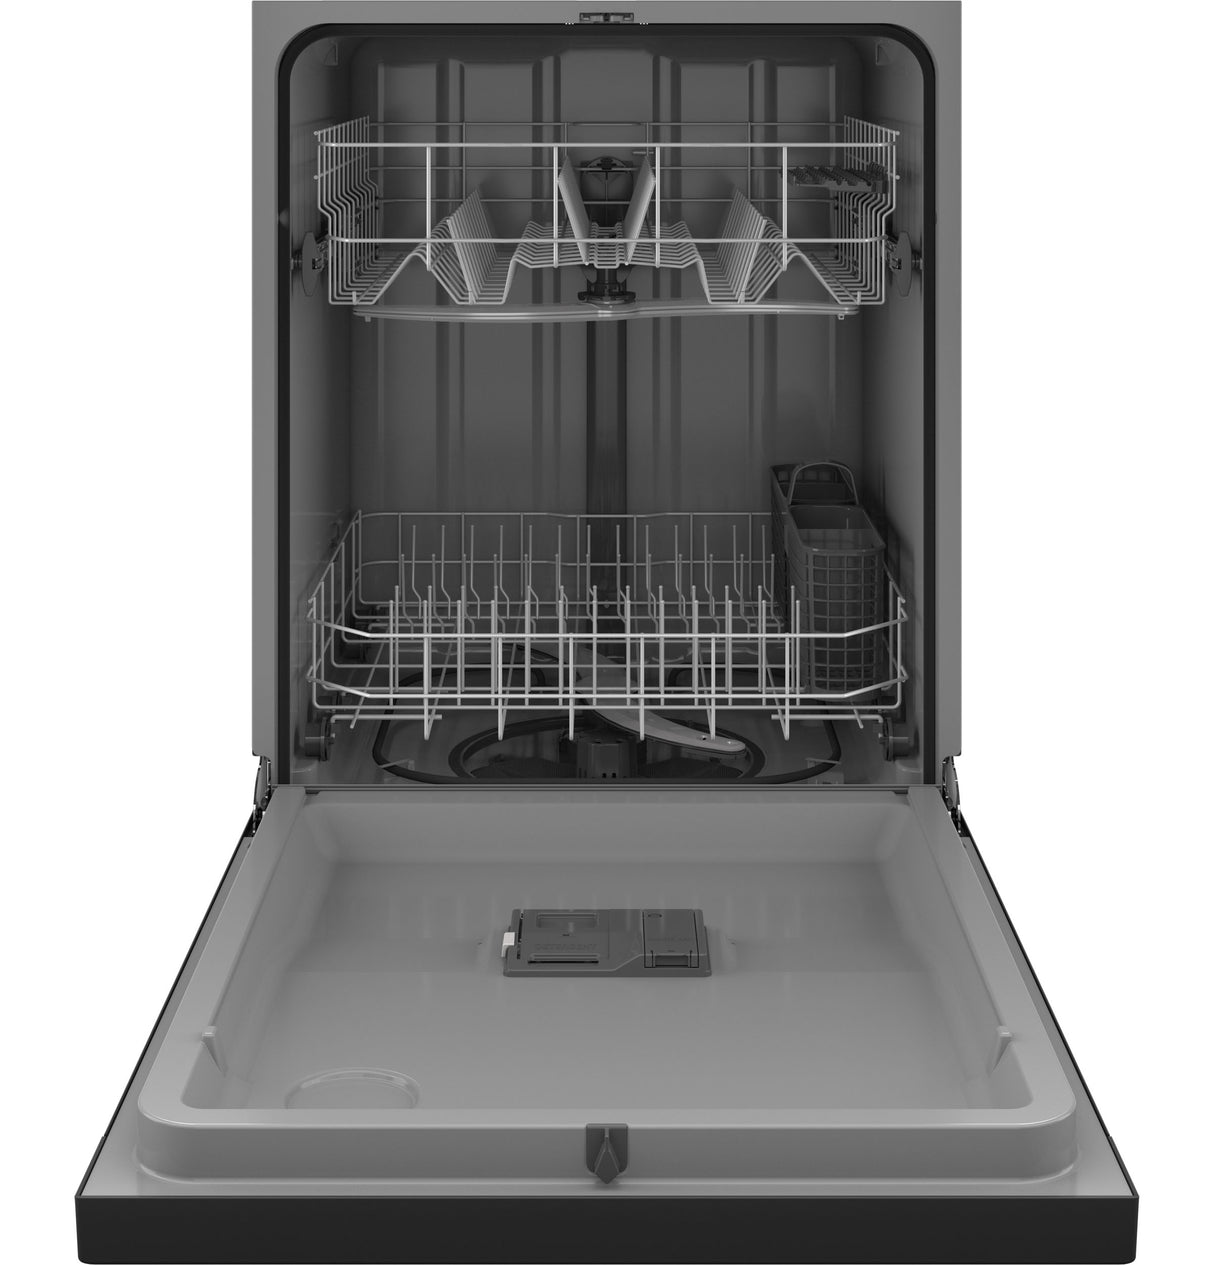 GE(R) ENERGY STAR(R) Dishwasher with Front Controls - (GDF535PGRBB)